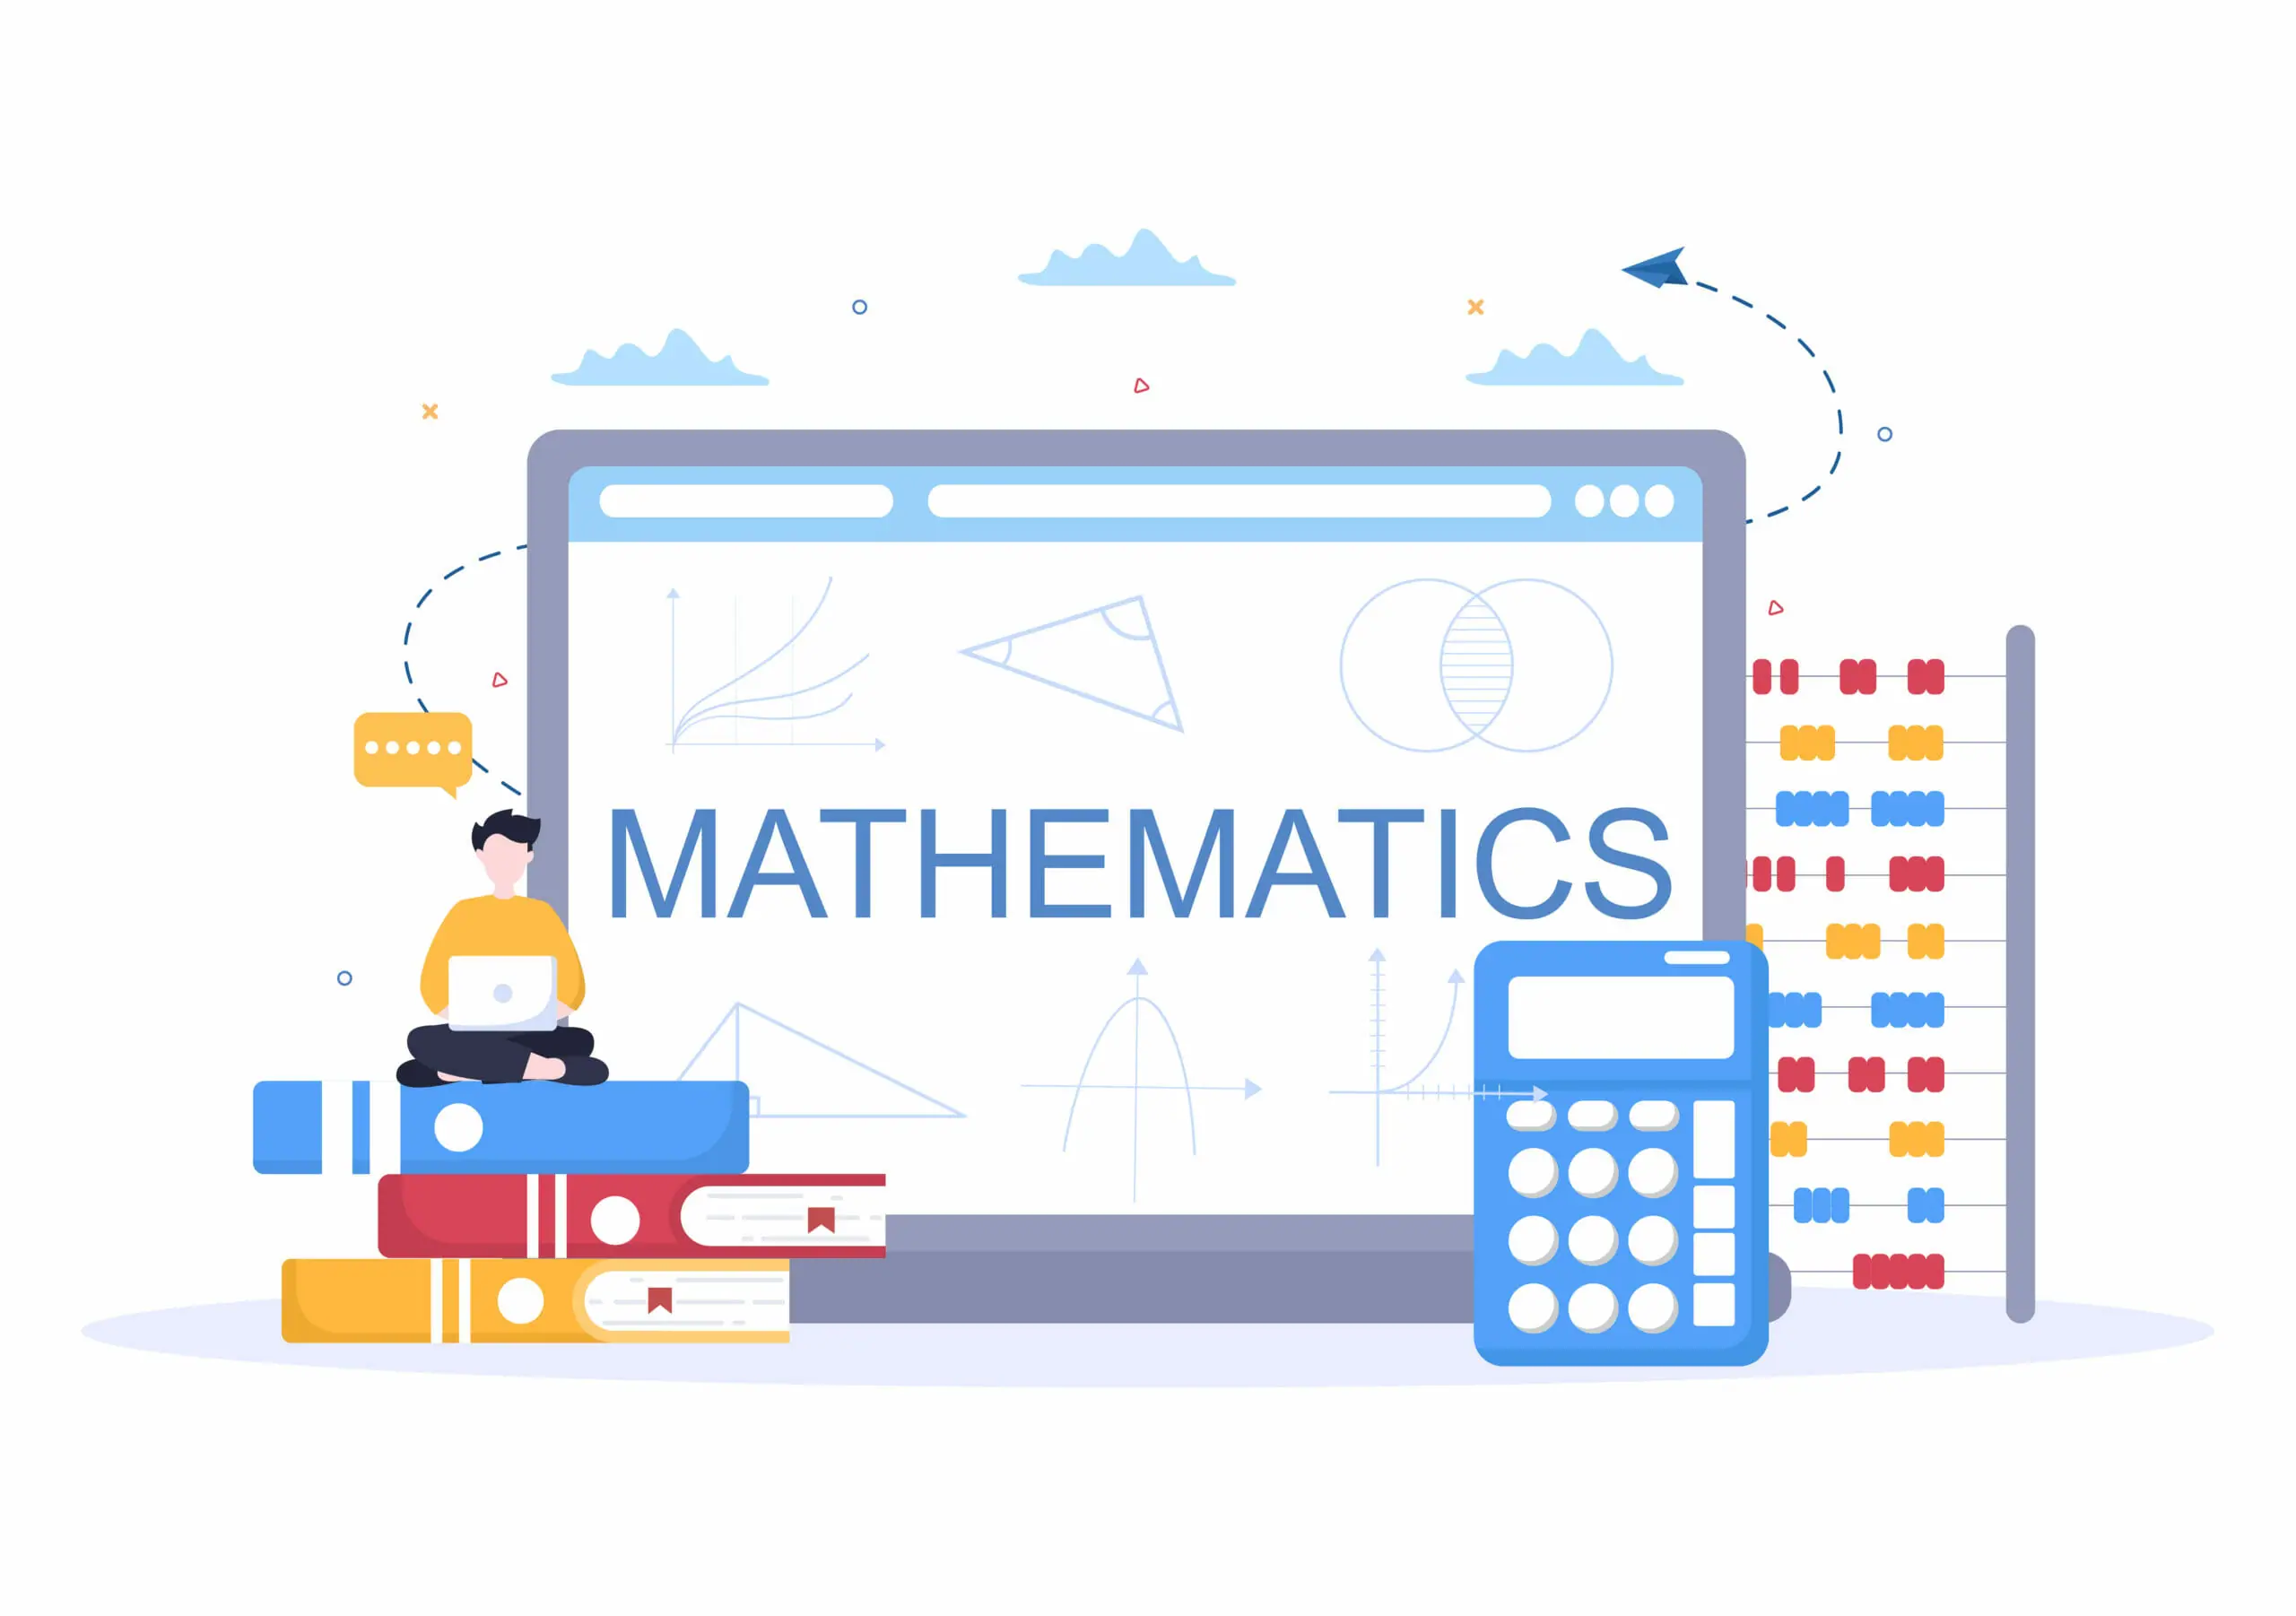 Learning Mathematics of Education and Knowledge Background Cartoon Vector Illustration. Science, Technology, Engineering, Formula or Basic Math